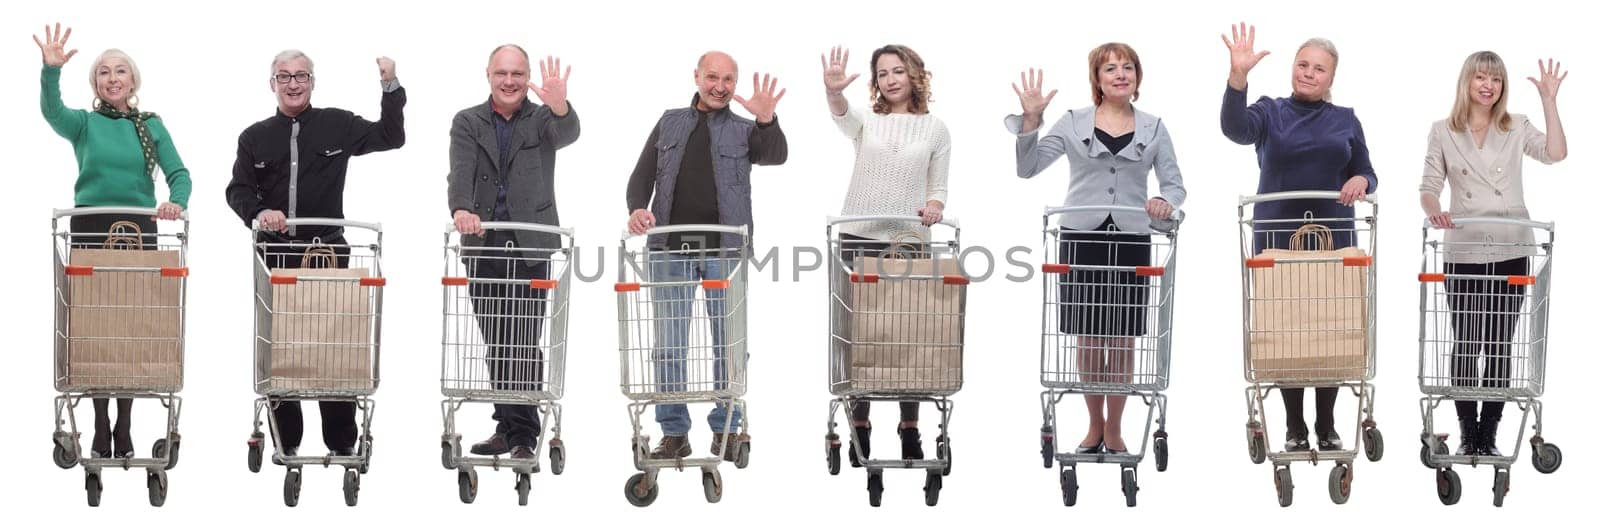 group of people with shopping cart showing thumbs up at camera by asdf